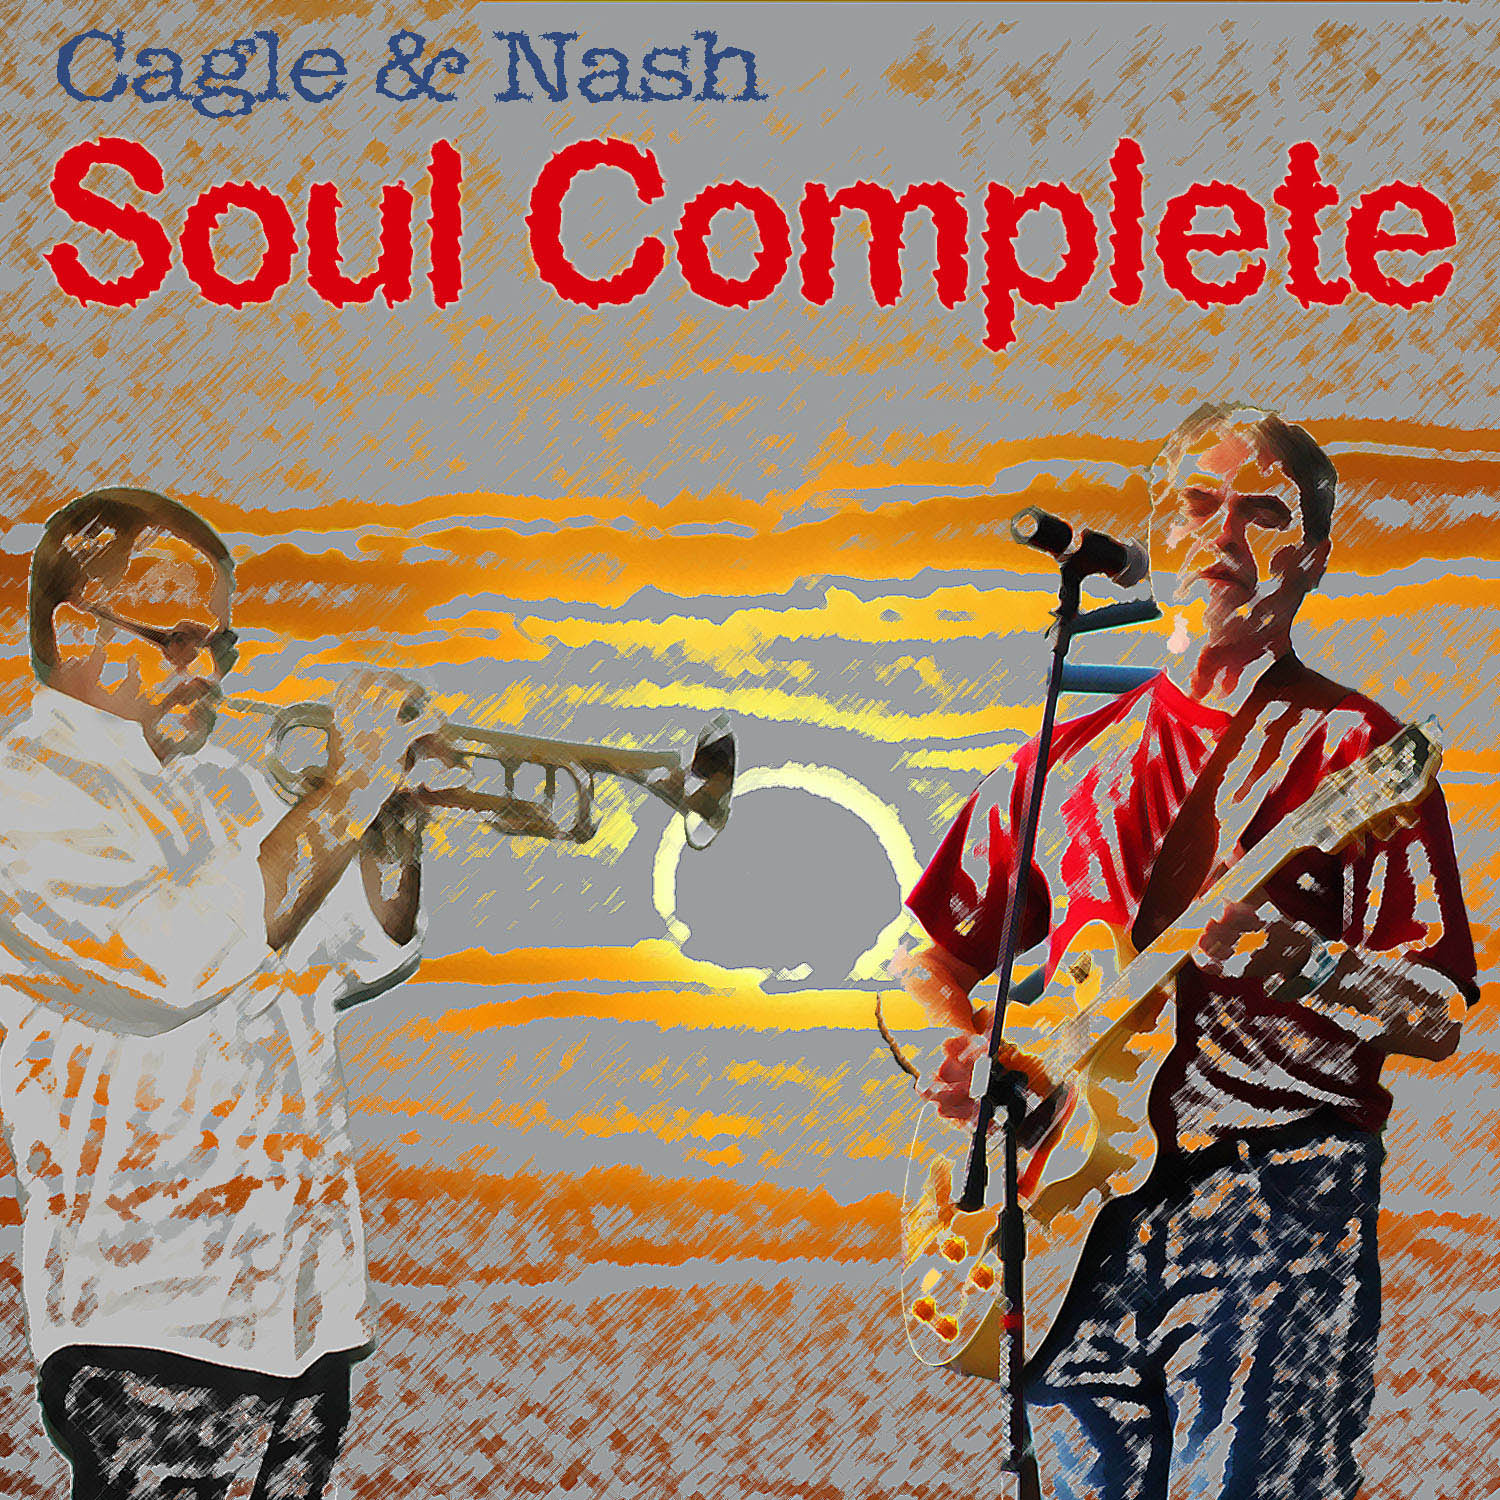 More Smooth and Soulful Tunes From NC Songwriting Duo: Cagle & Nash